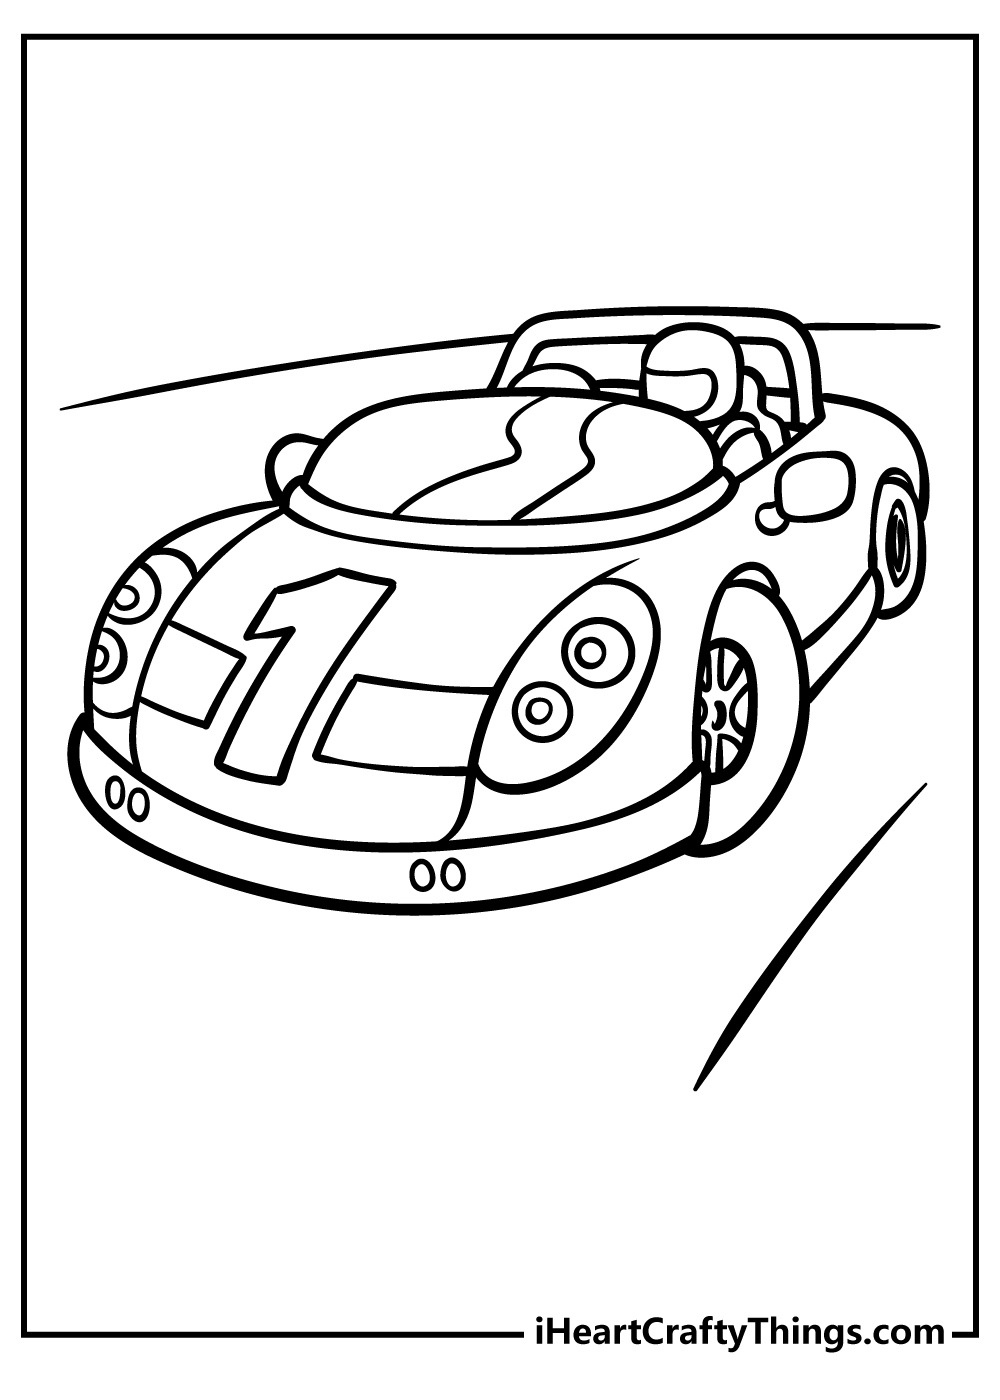 Race Car Coloring Book for kids free printable